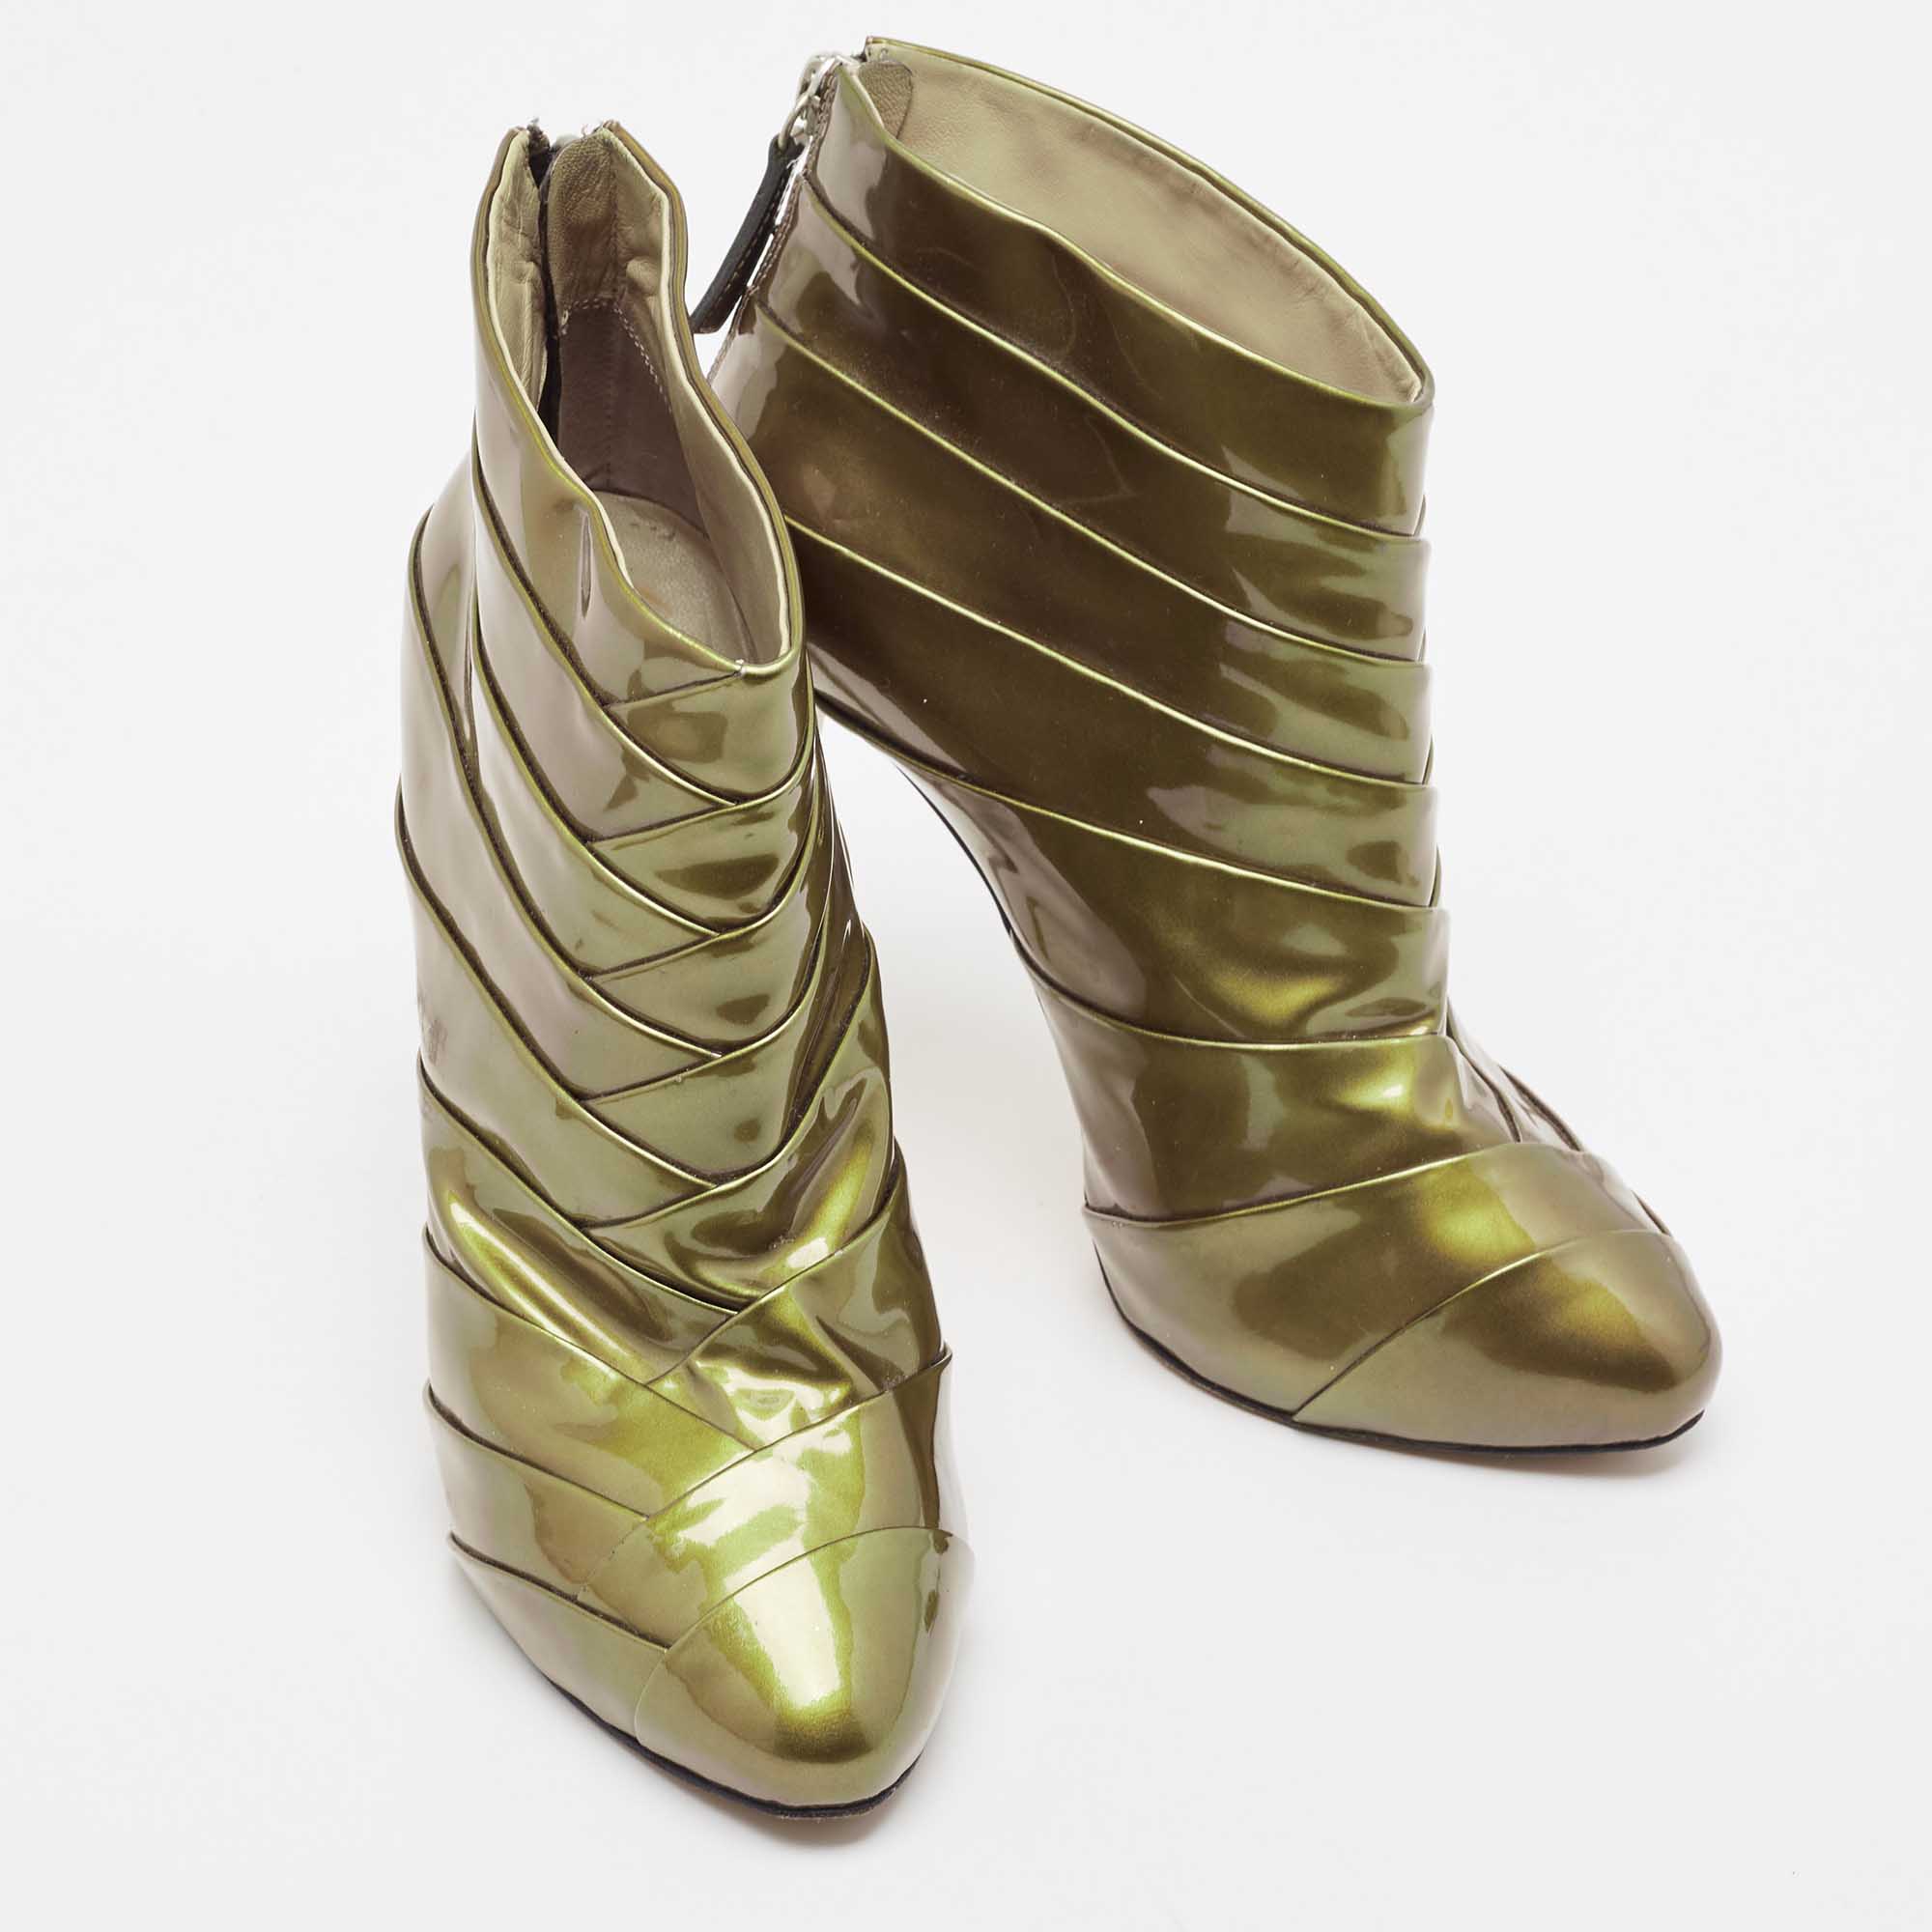 Giuseppe Zanotti Olive Green Patent Leather Ankle Booties Size 38